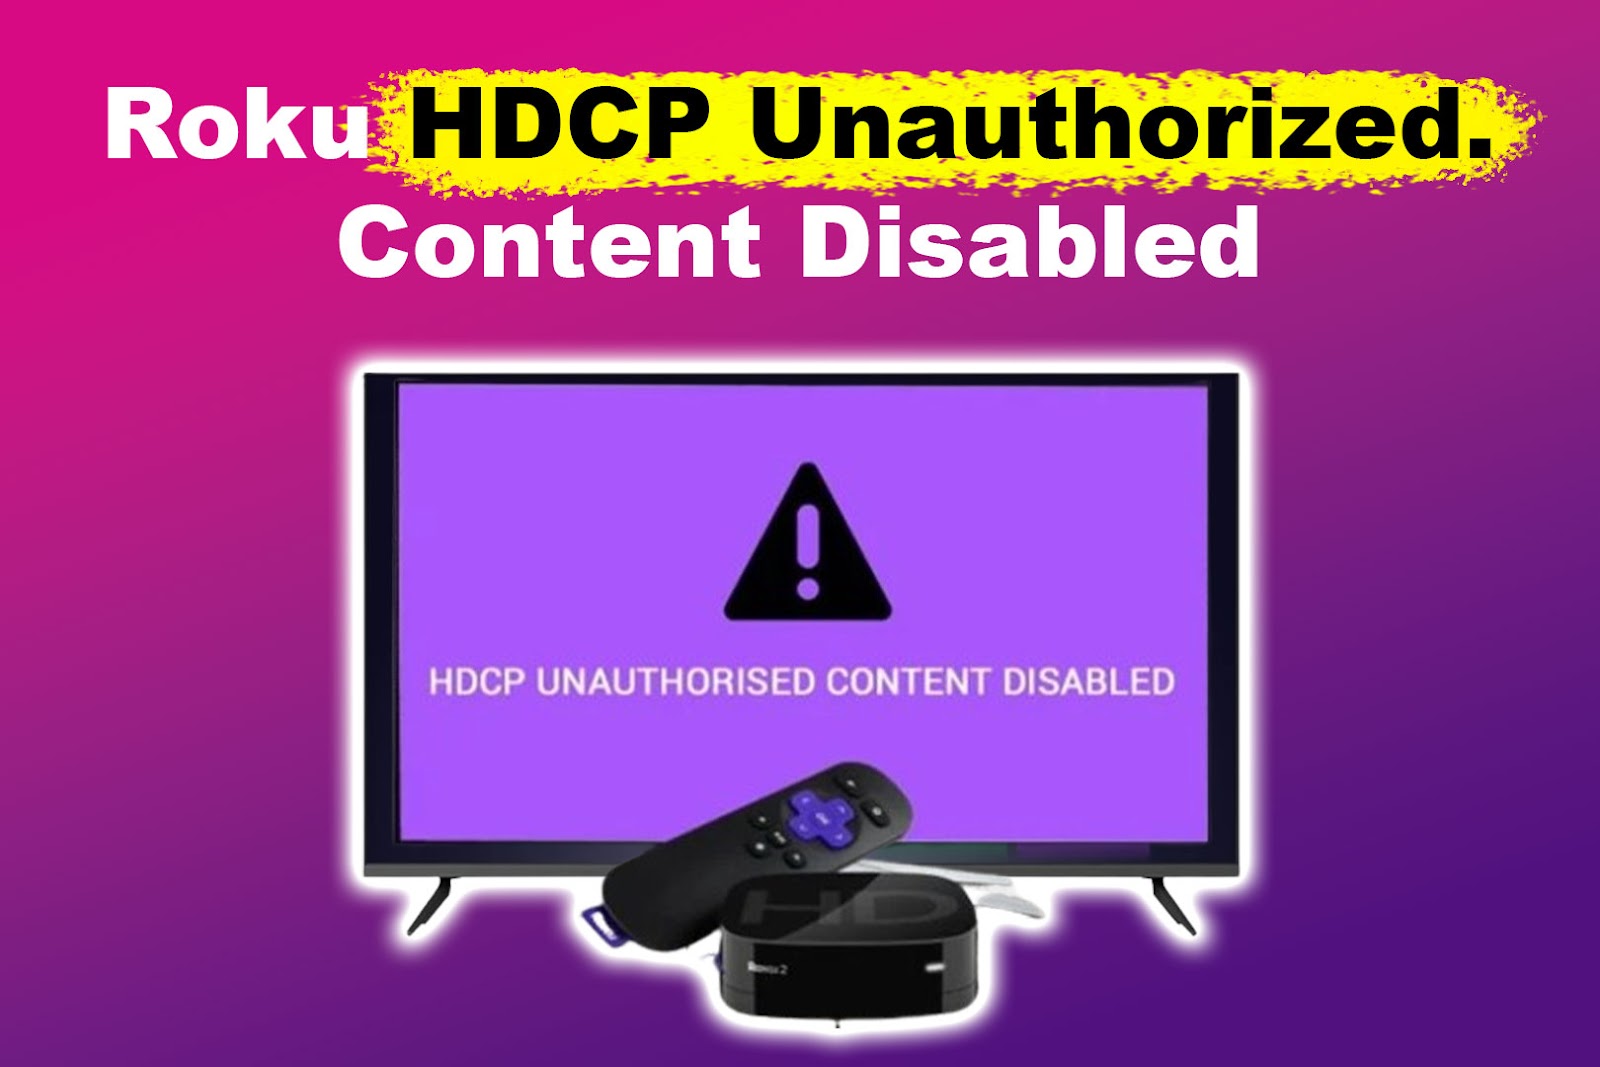 Roku HDCP Unauthorized. Content Disabled